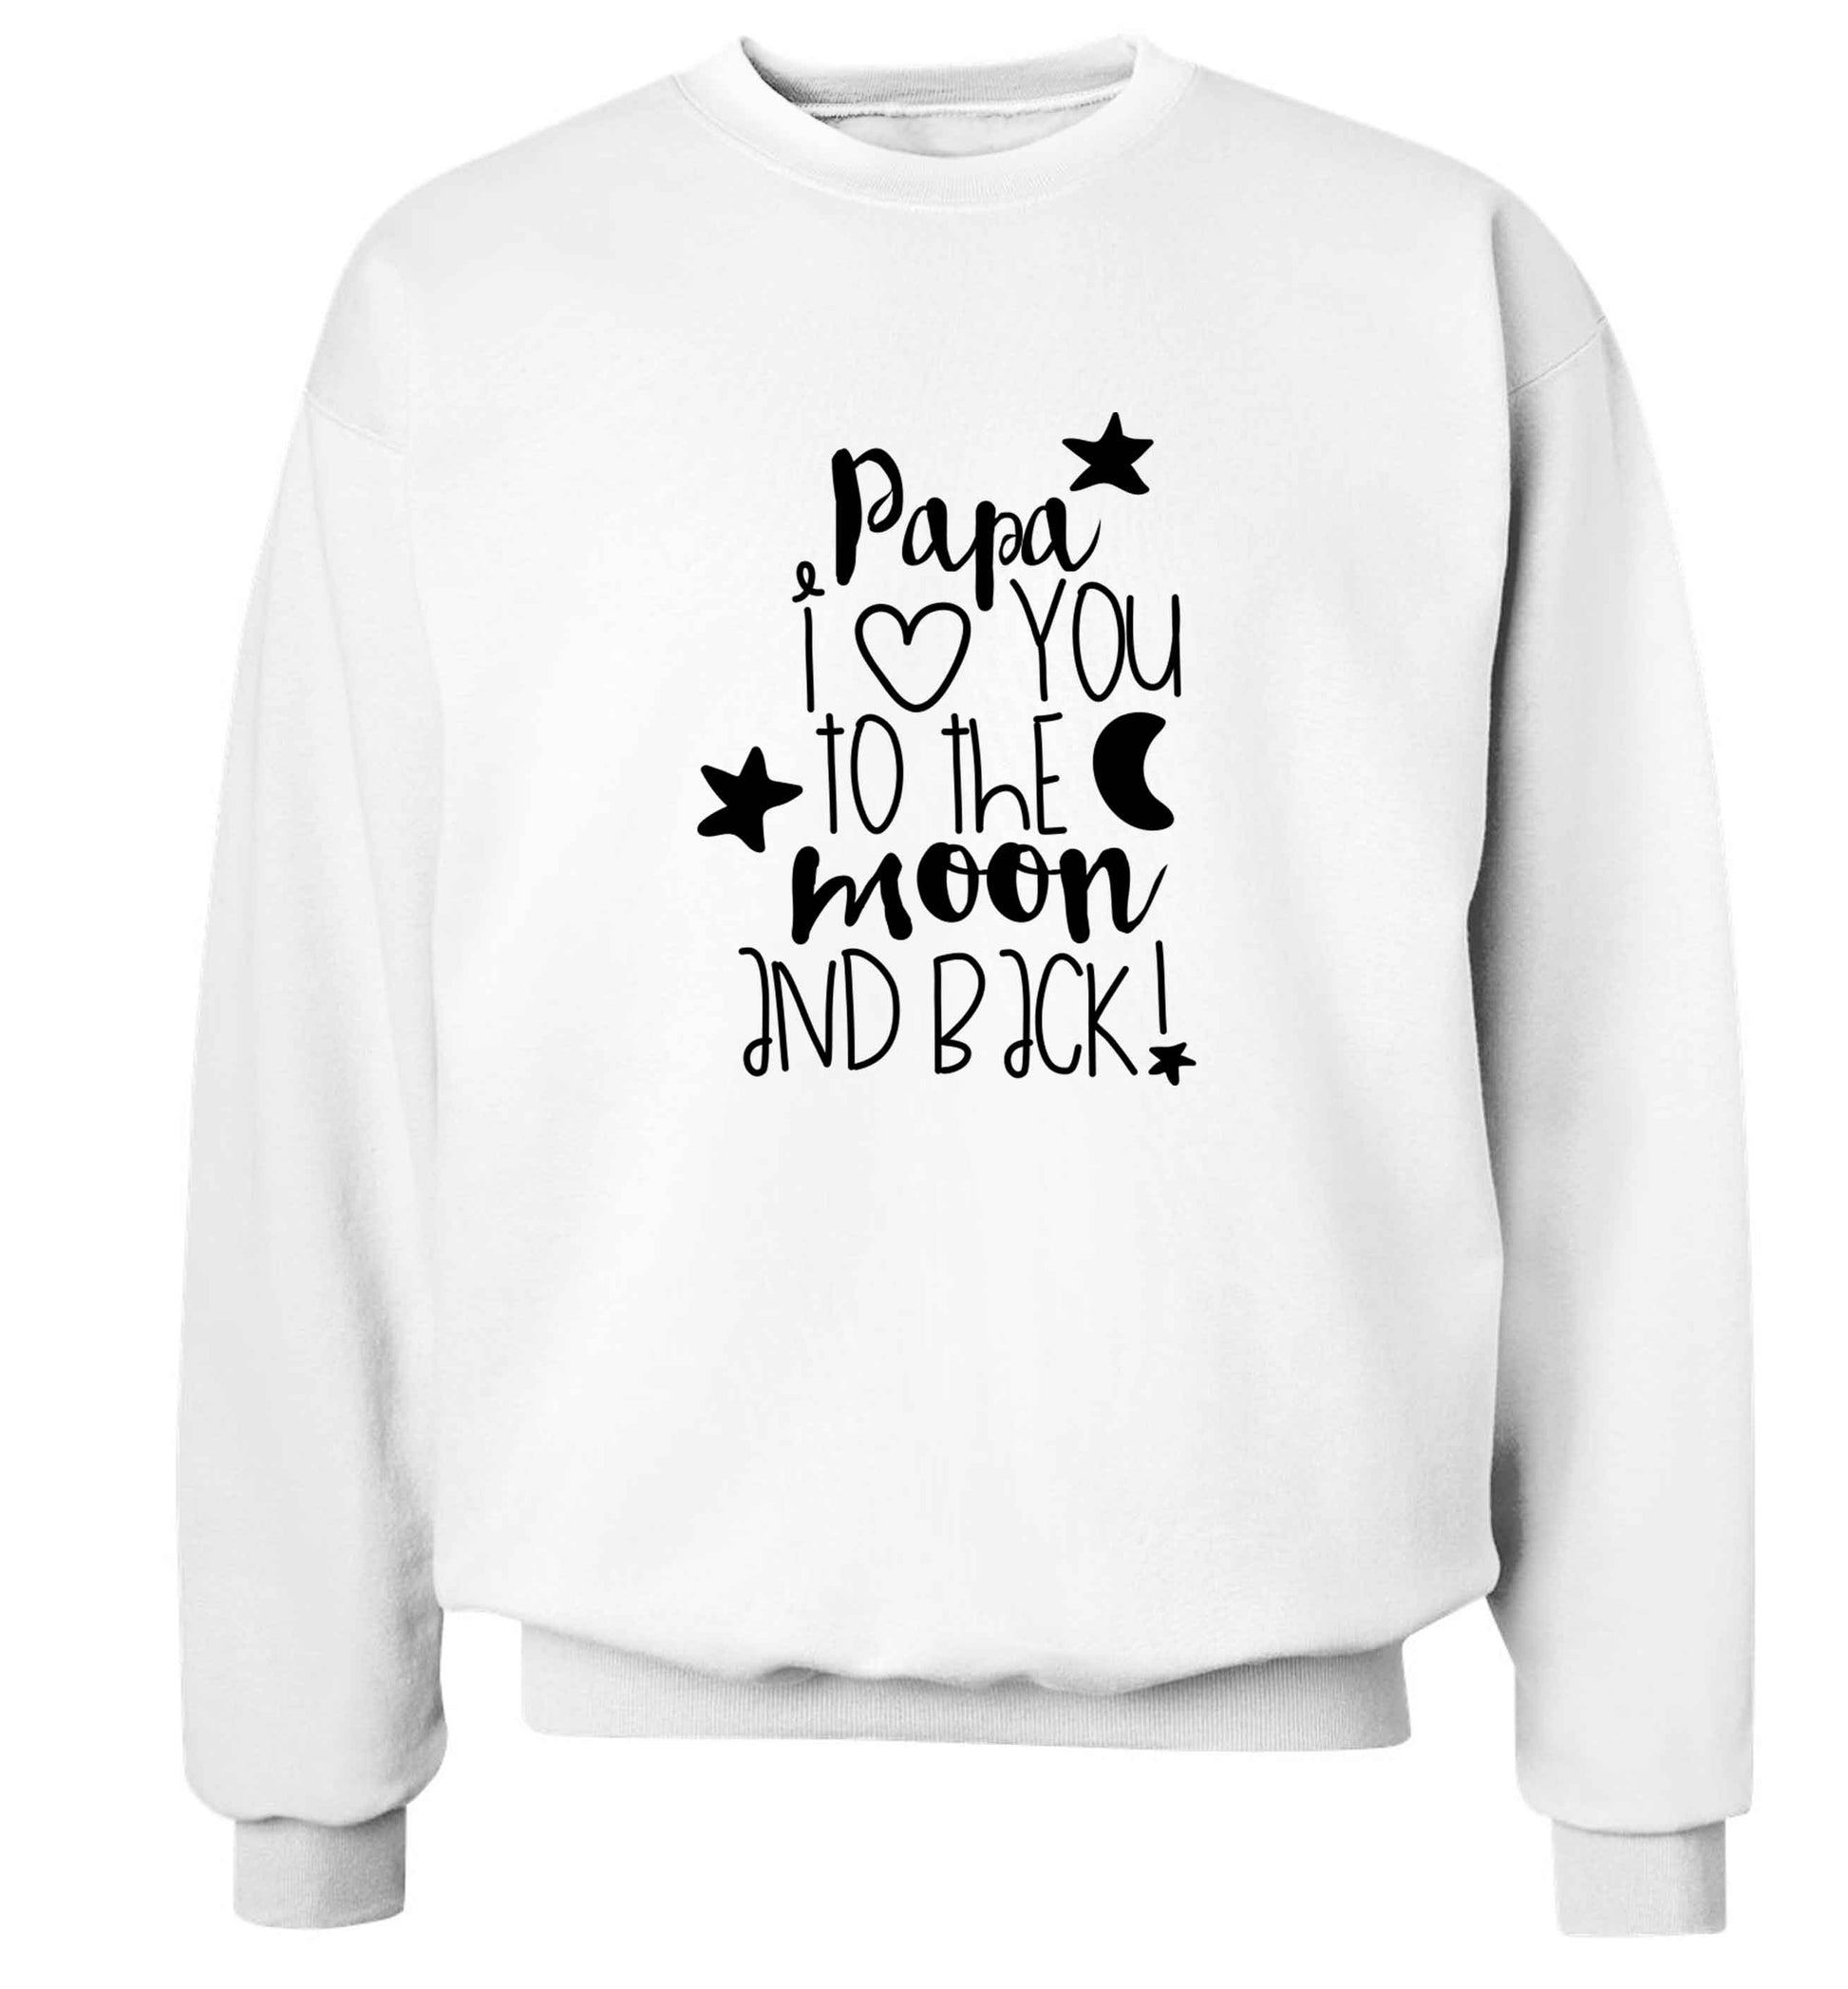 Papa I love you to the moon and back adult's unisex white sweater 2XL